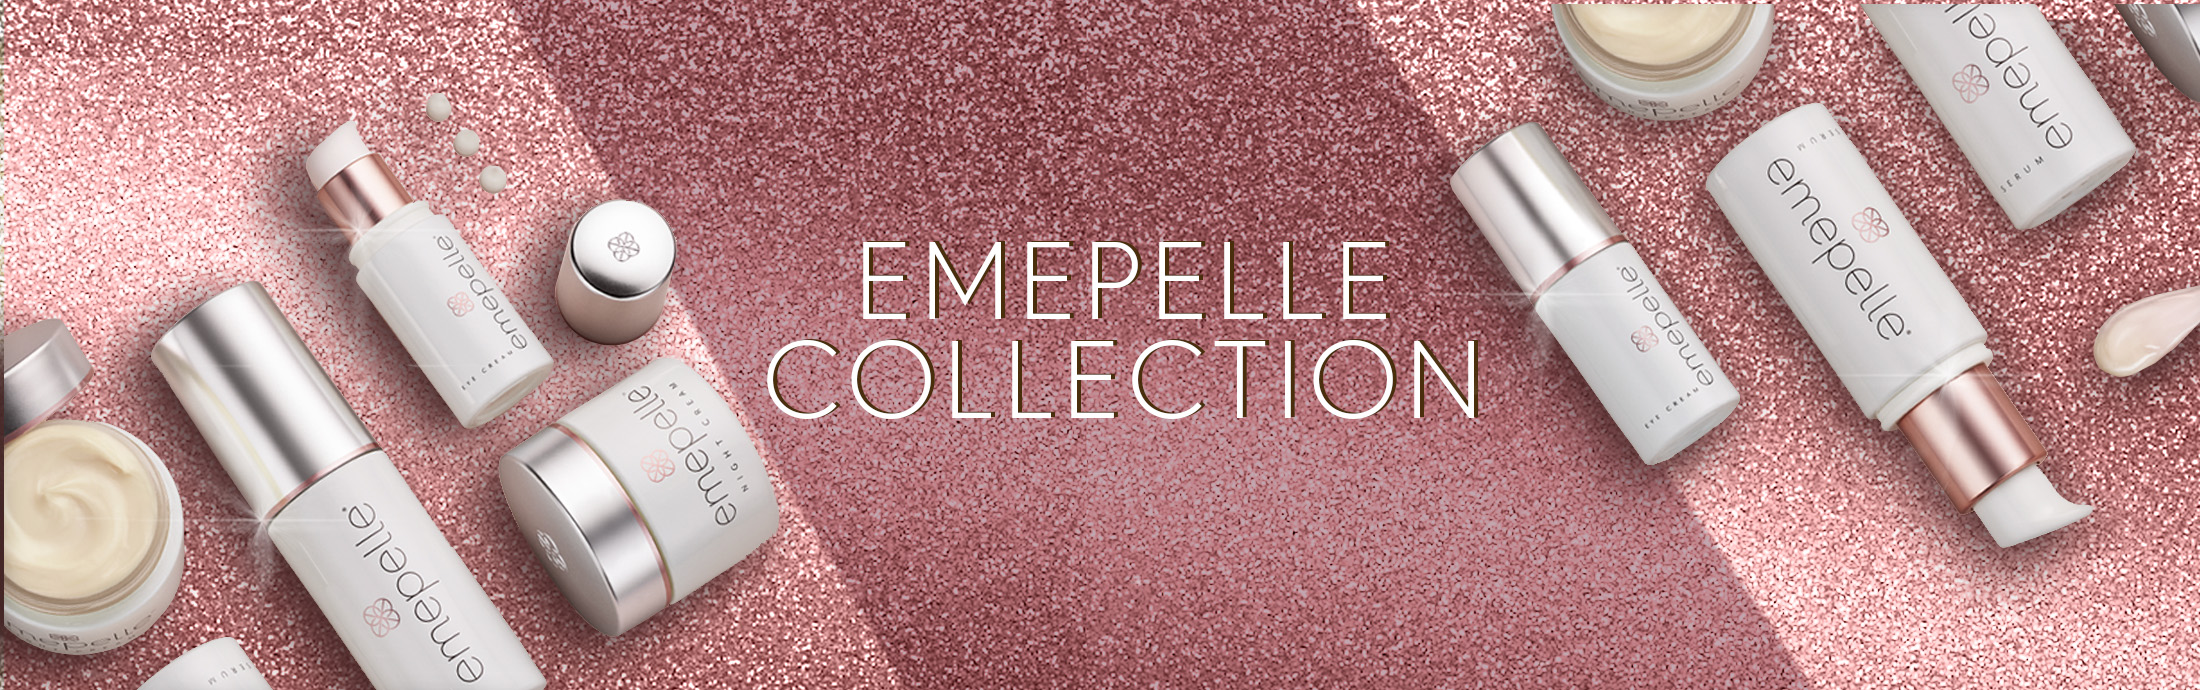 Emepelle Collection